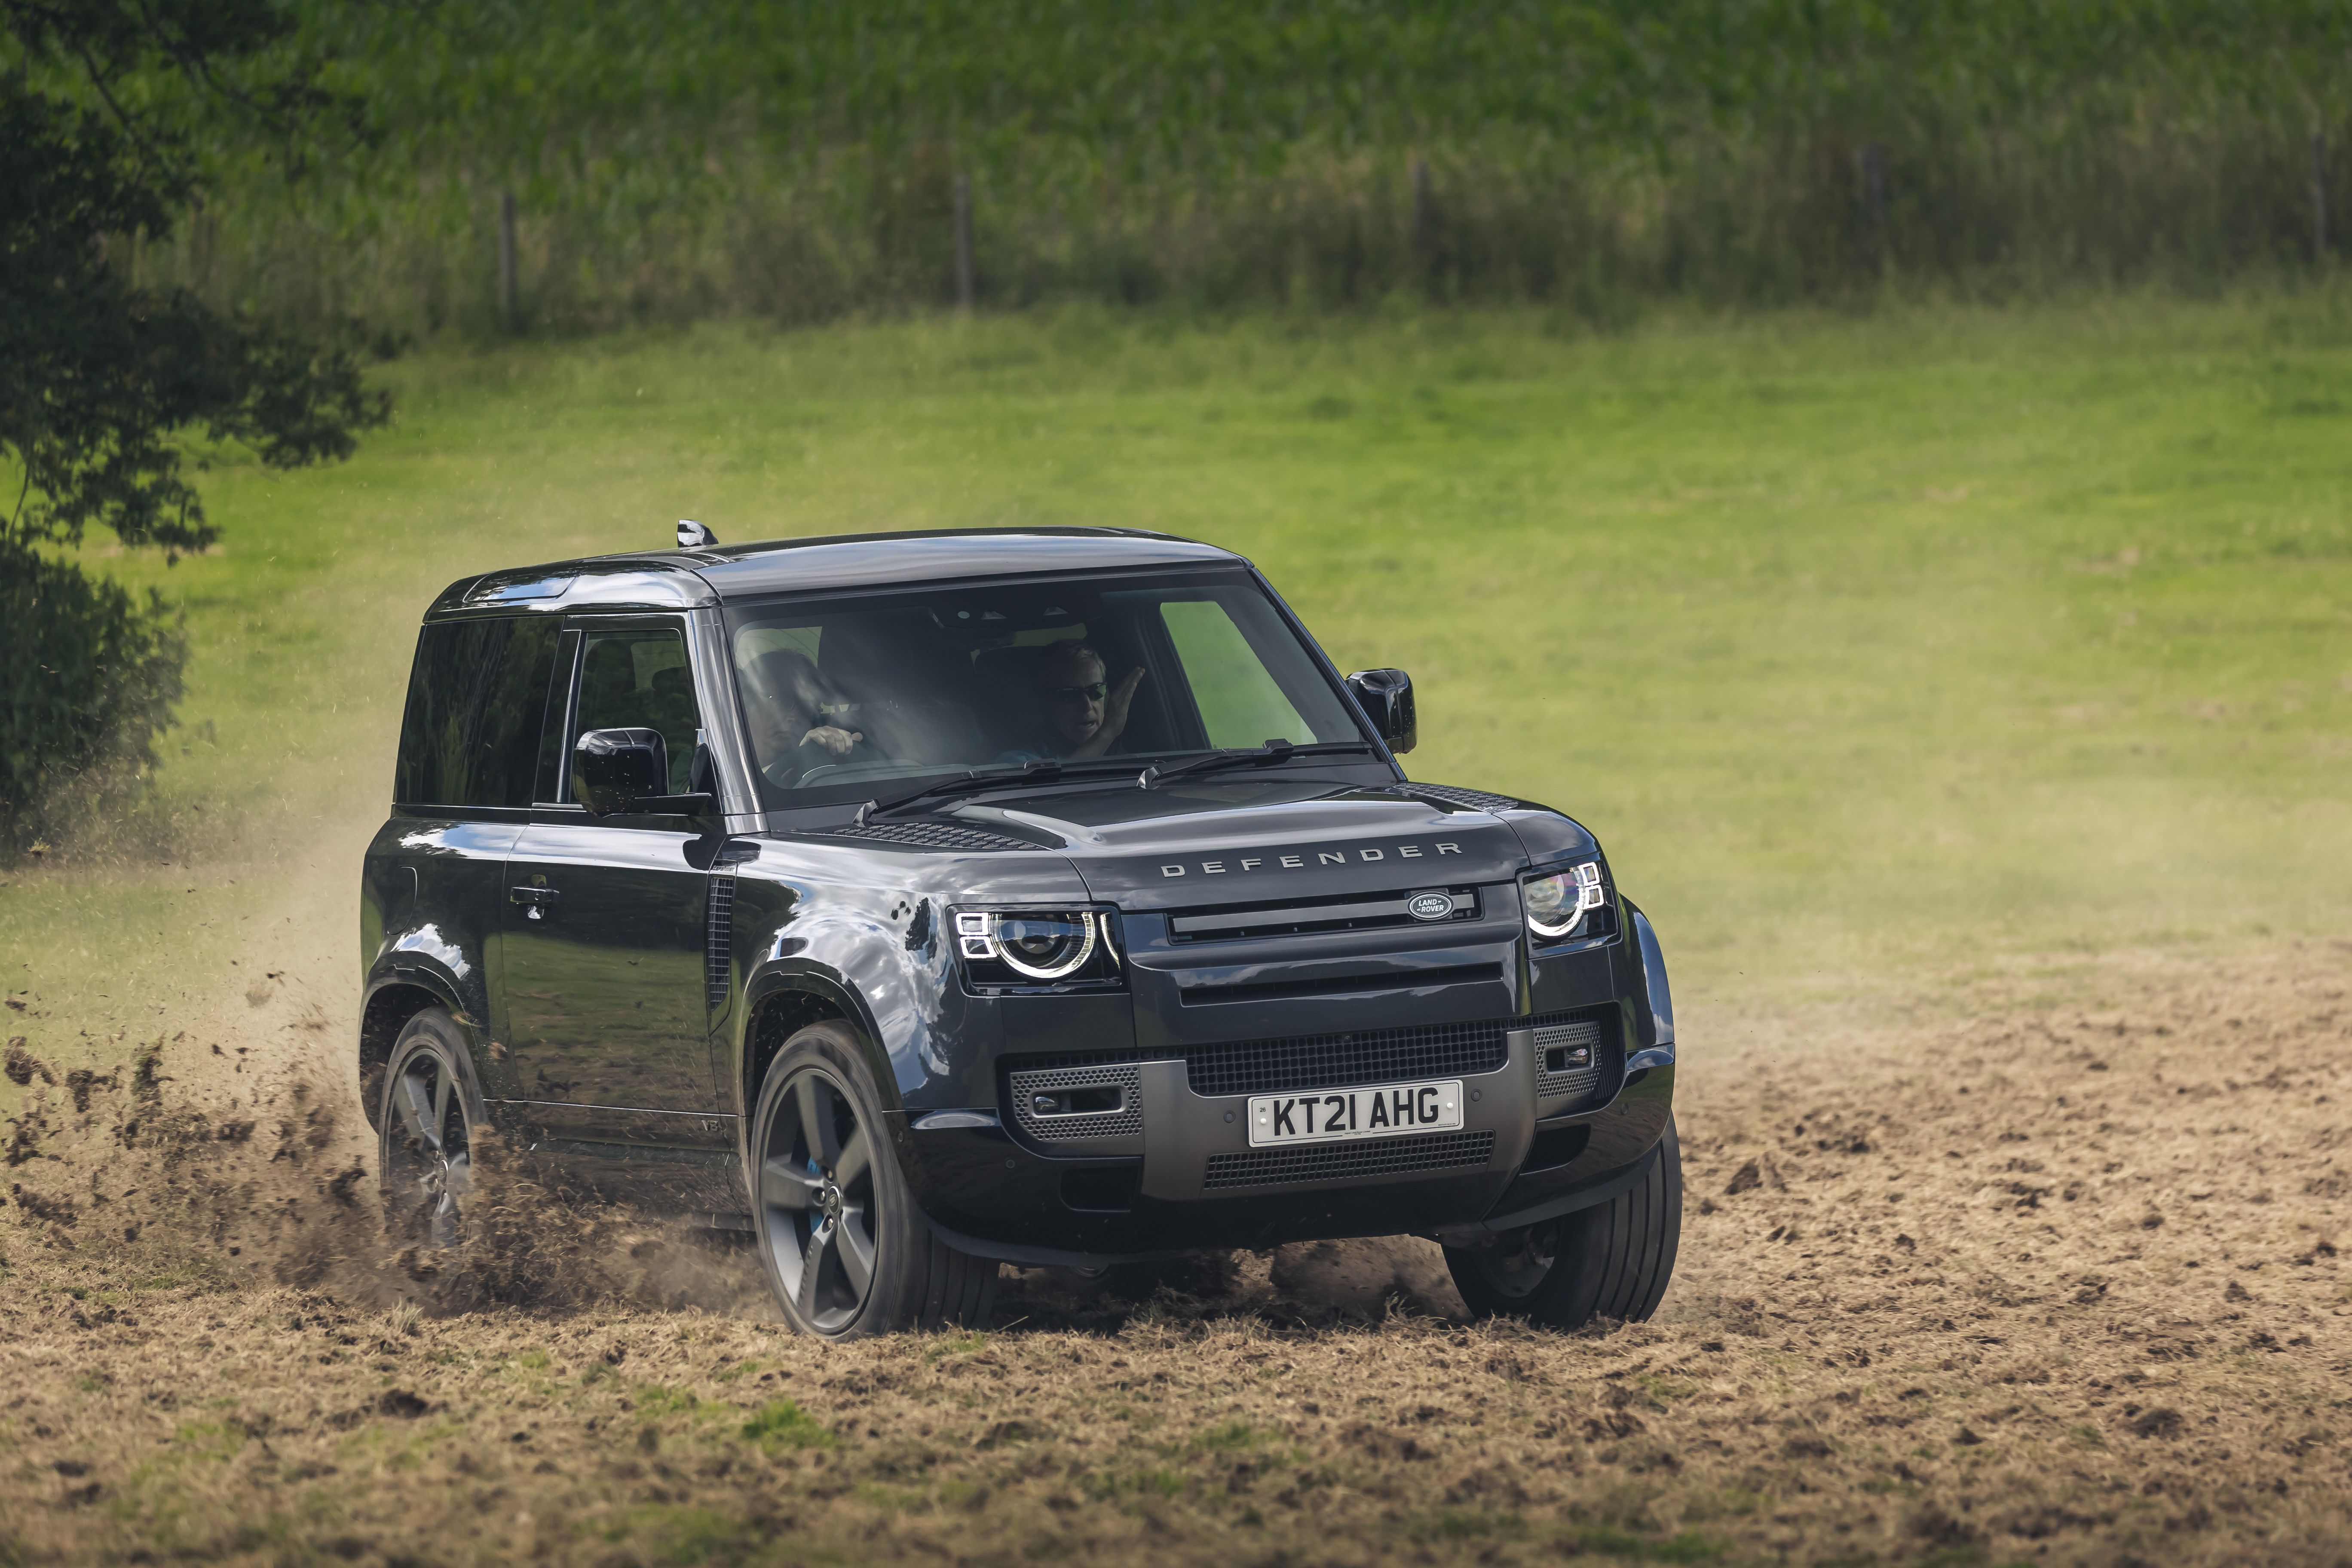 2021 Land Rover Defender 90 First Drive Review: Get This One